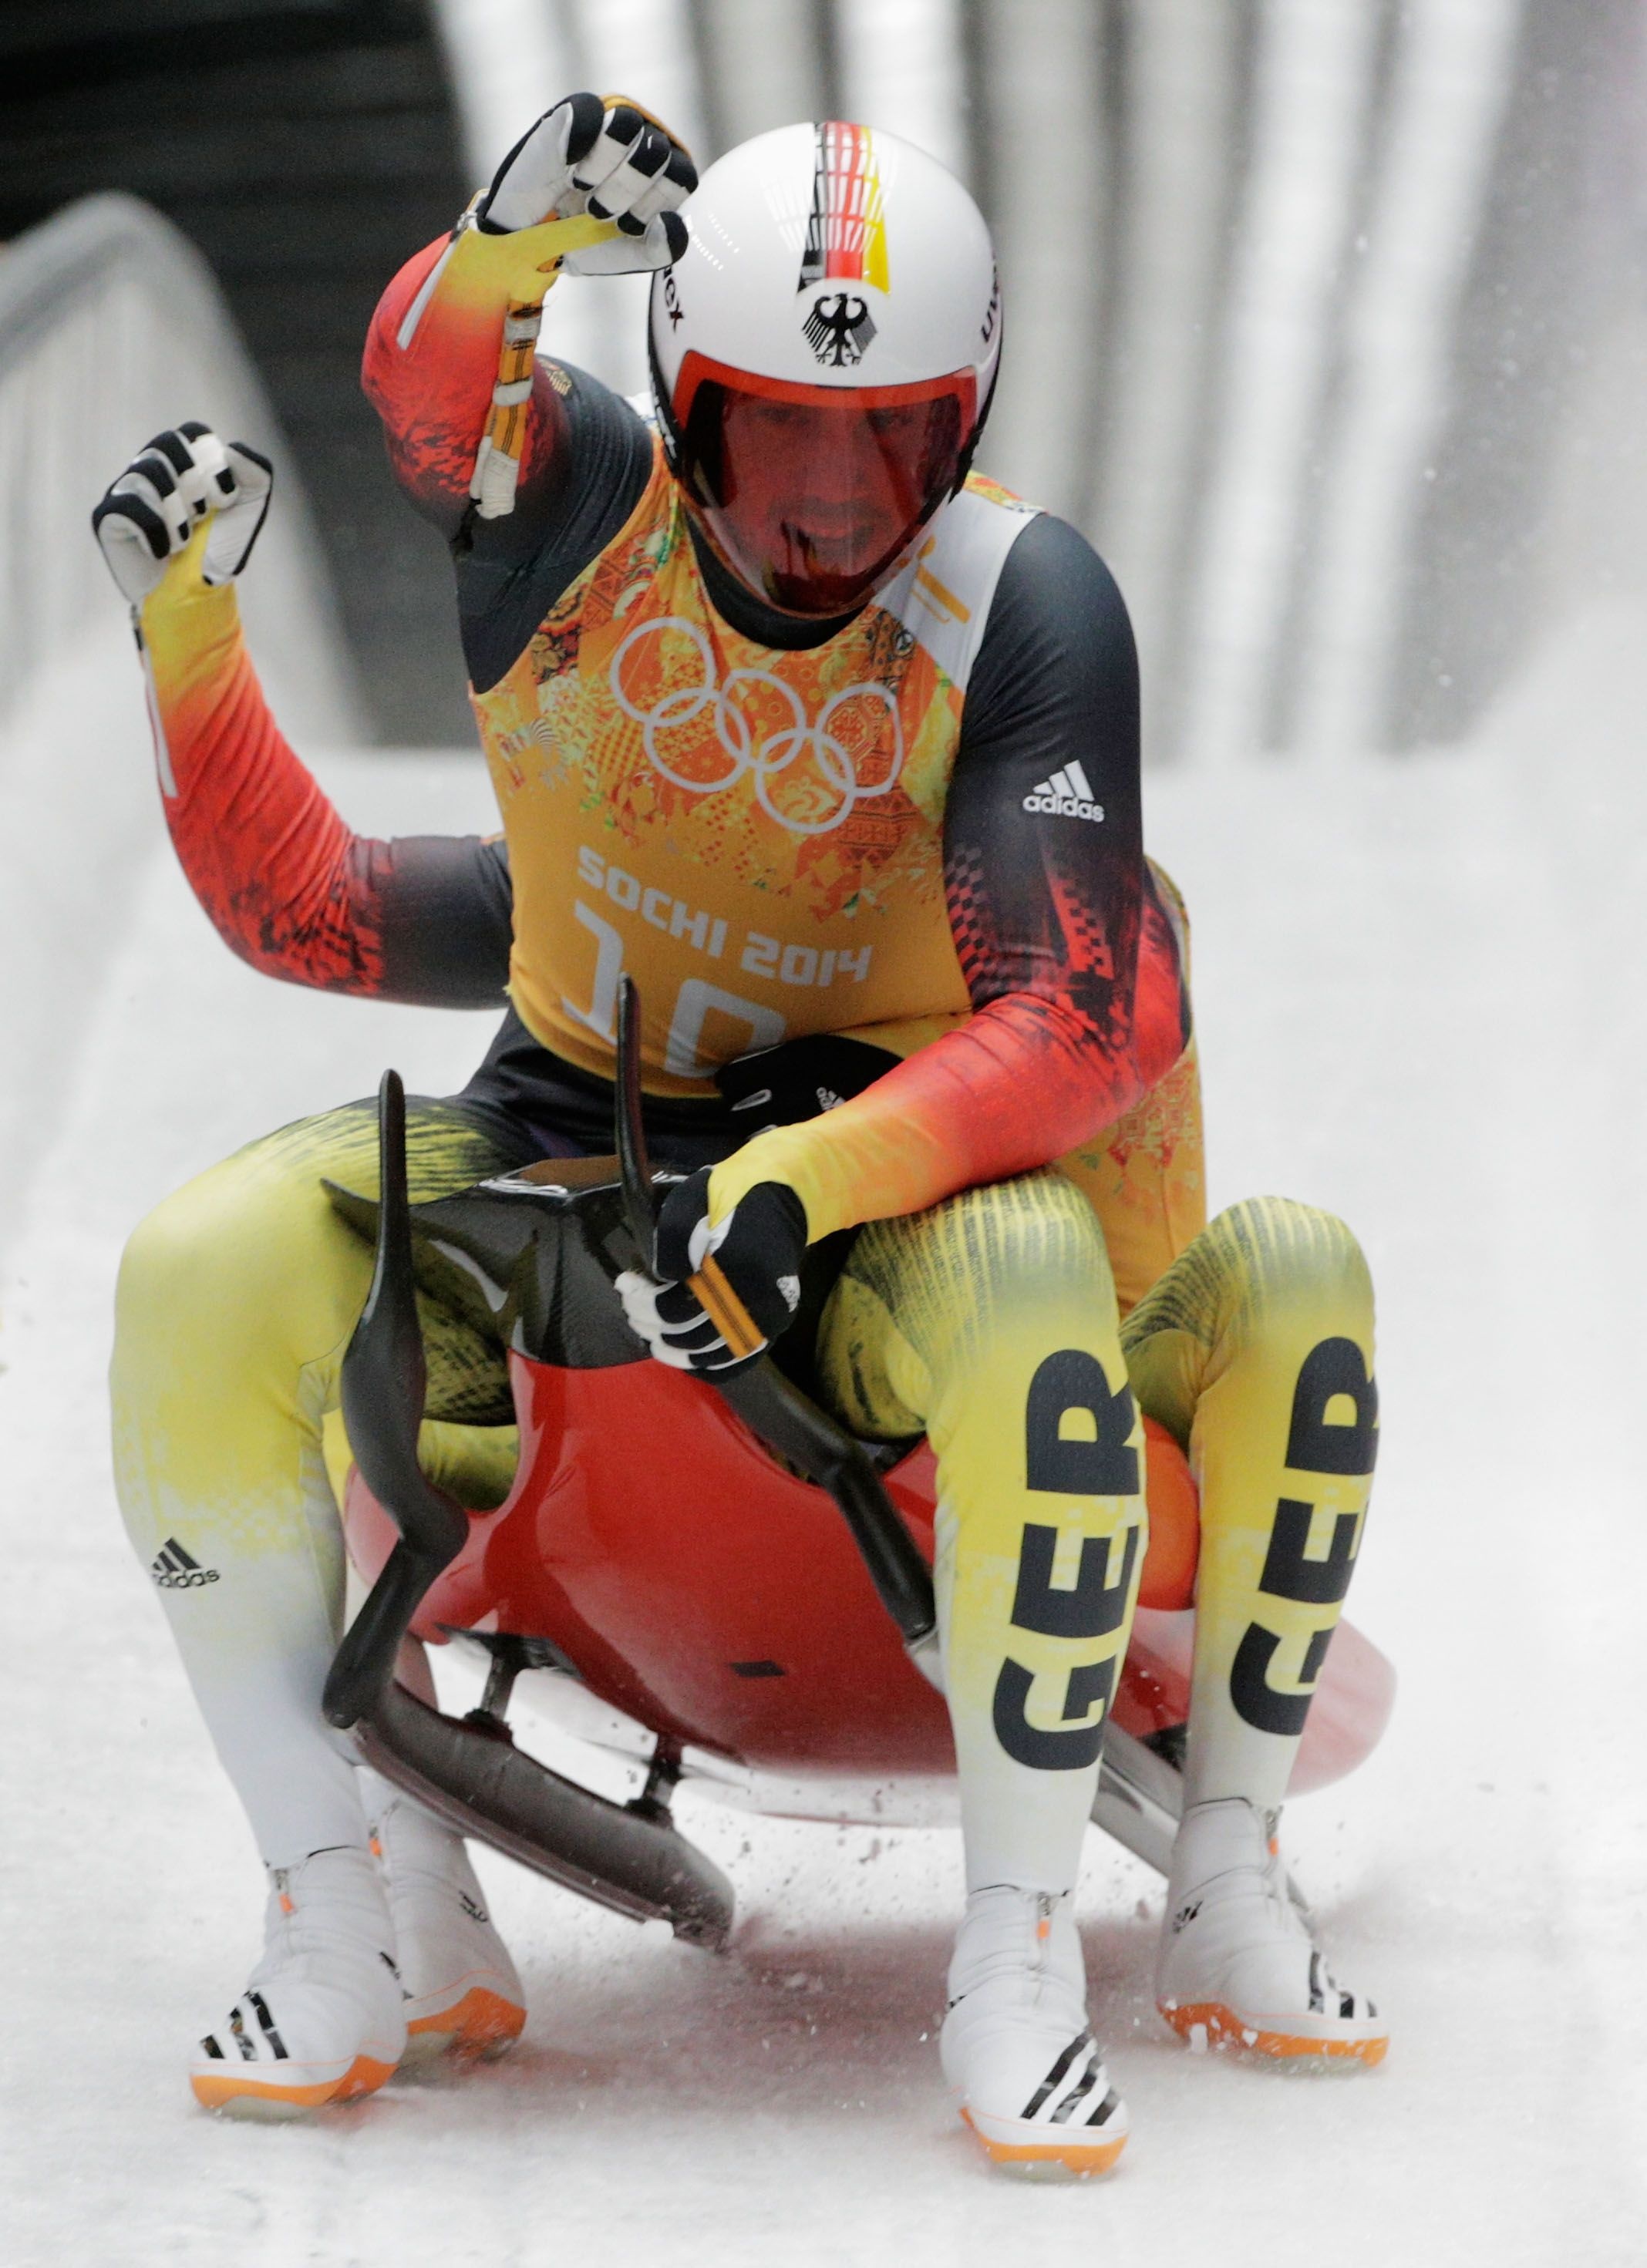 Luge: Tobias Wendl and Tobias Arlt of Germany finish a run during the Luge Relay at the Sochi 2014 Winter Olympics. 2140x2950 HD Wallpaper.